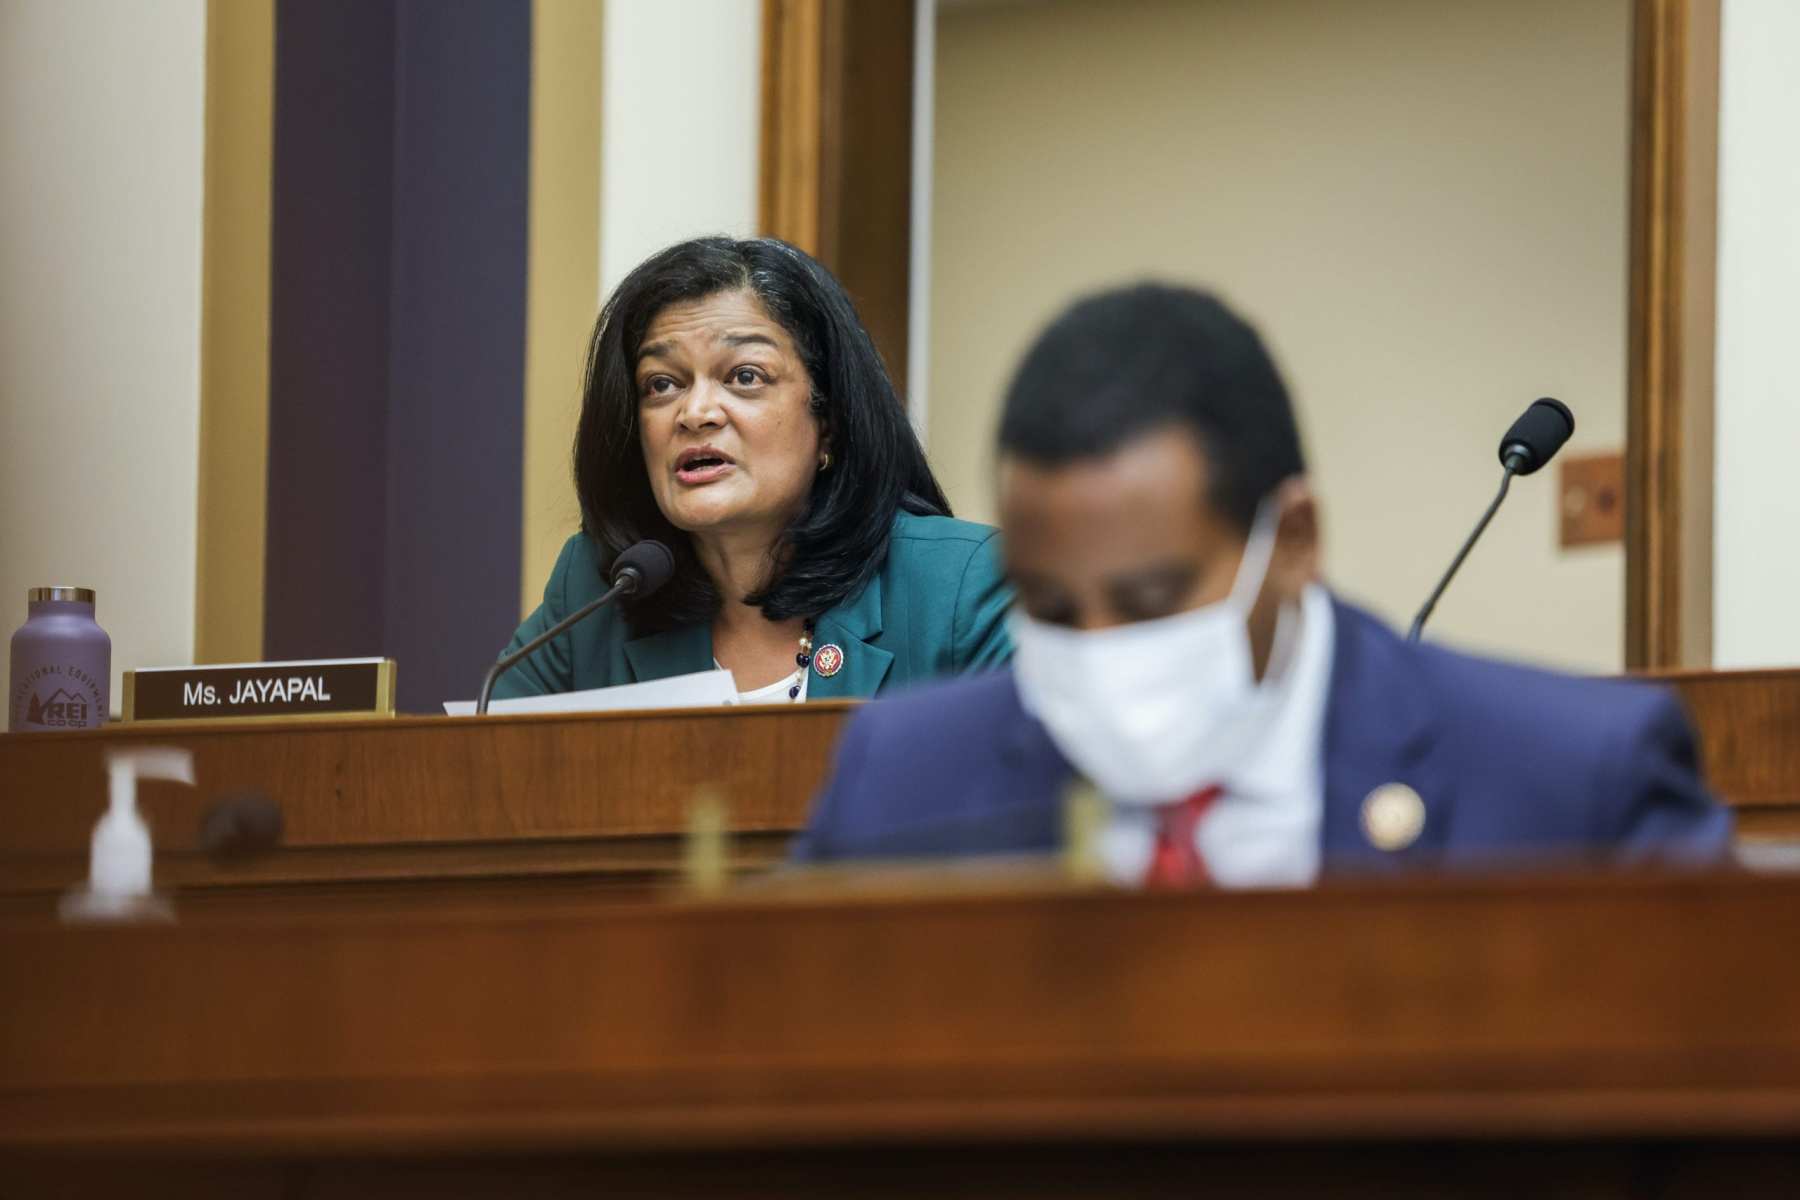 WASHINGTON, DC - JULY 29: Rep. Pramila Jayapal (D-WA) speaks during the House Judiciary Subcommittee on Antitrust, Commercial and Administrative Law hearing on Online Platforms and Market Power in the Rayburn House office Building, July 29, 2020 on Capitol Hill in Washington, DC. The committee was scheduled to hear testimony from the CEOs of Apple, Facebook, Amazon and Google. (Photo by Graeme Jennings-Pool/Getty Images)